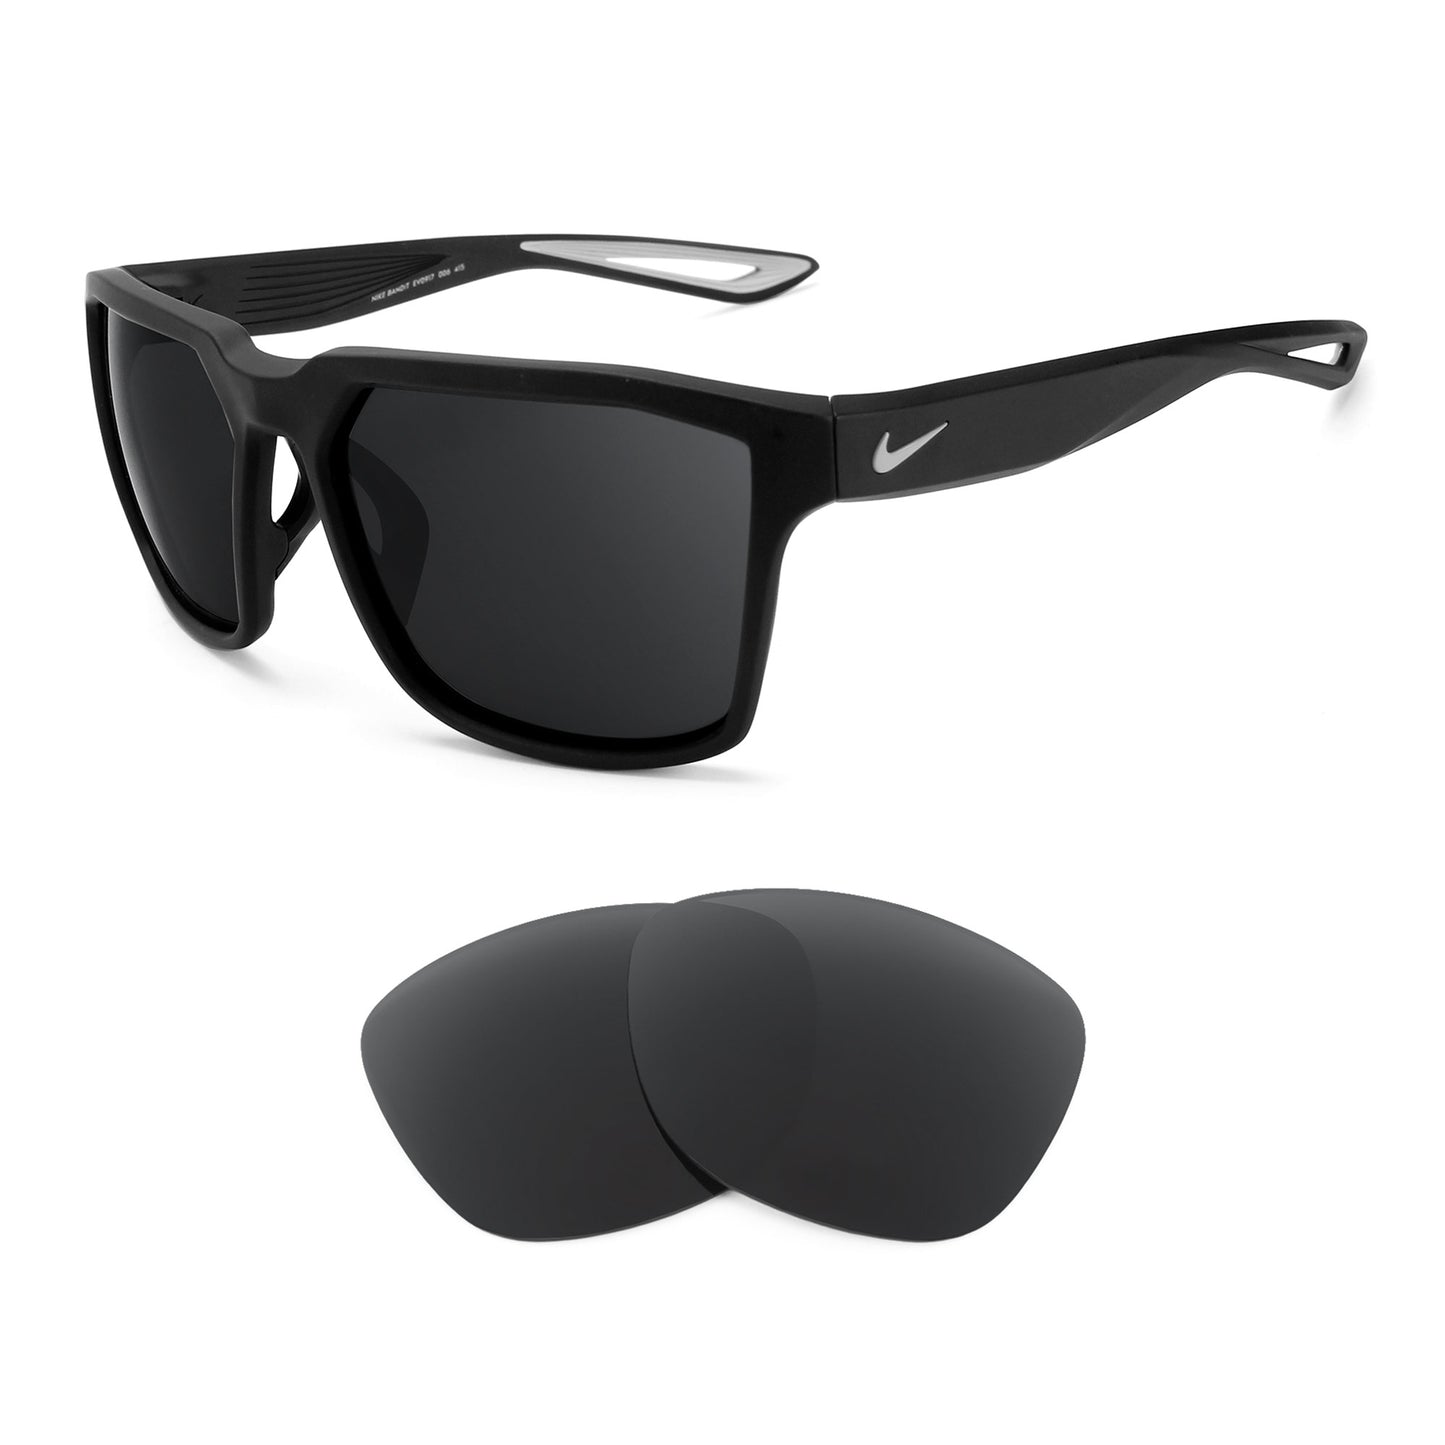 Nike Bandit sunglasses with replacement lenses